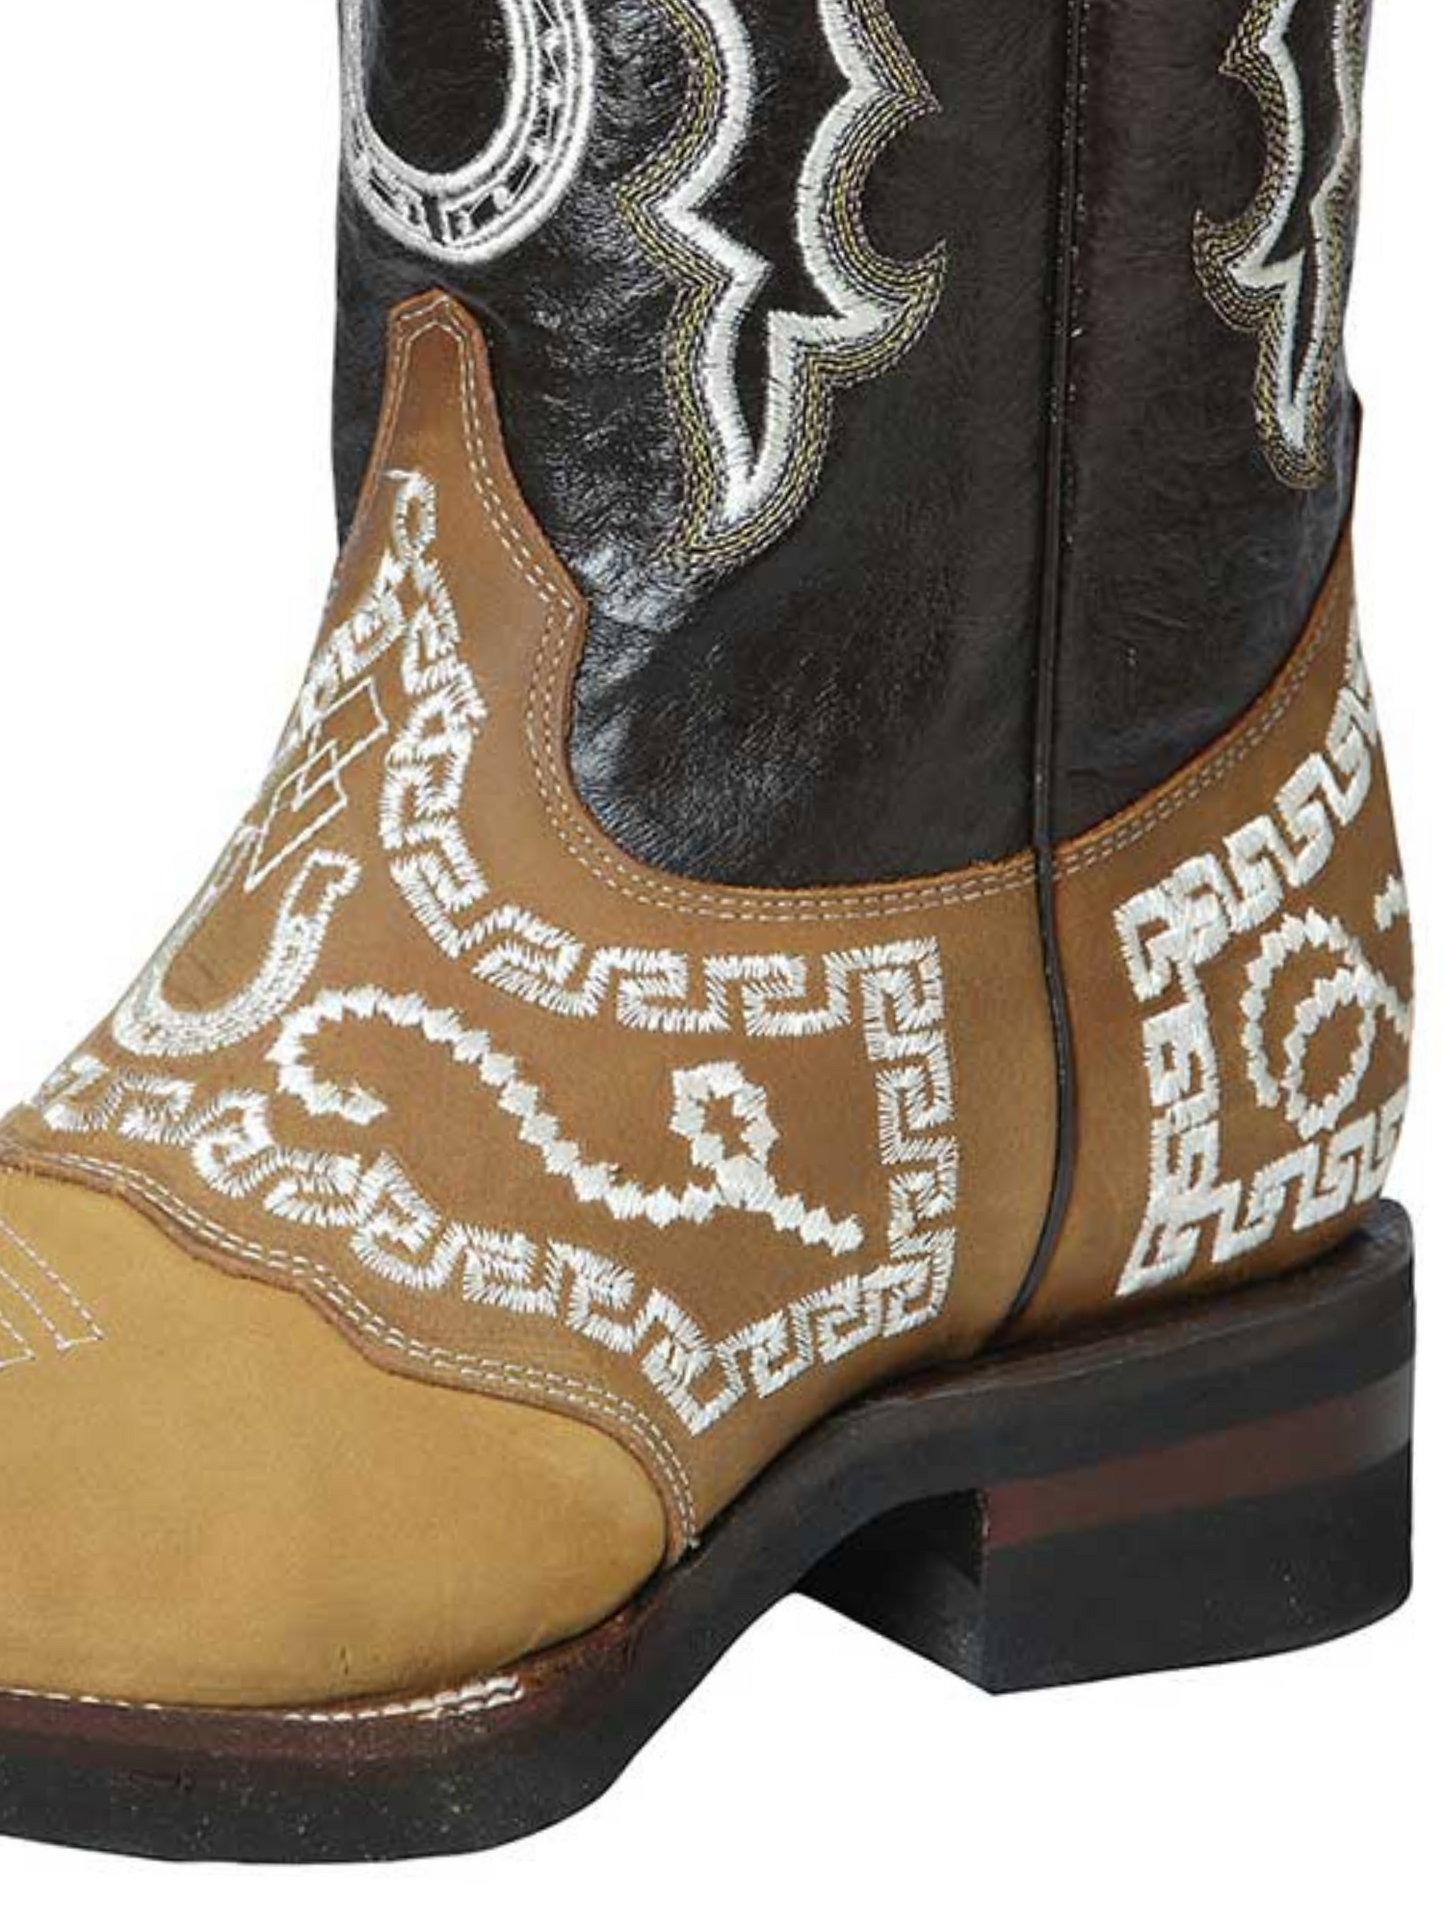 Rodeo Cowboy Boots with Embroidered Nubuck Leather Mask for Men 'El General' - ID: 51111